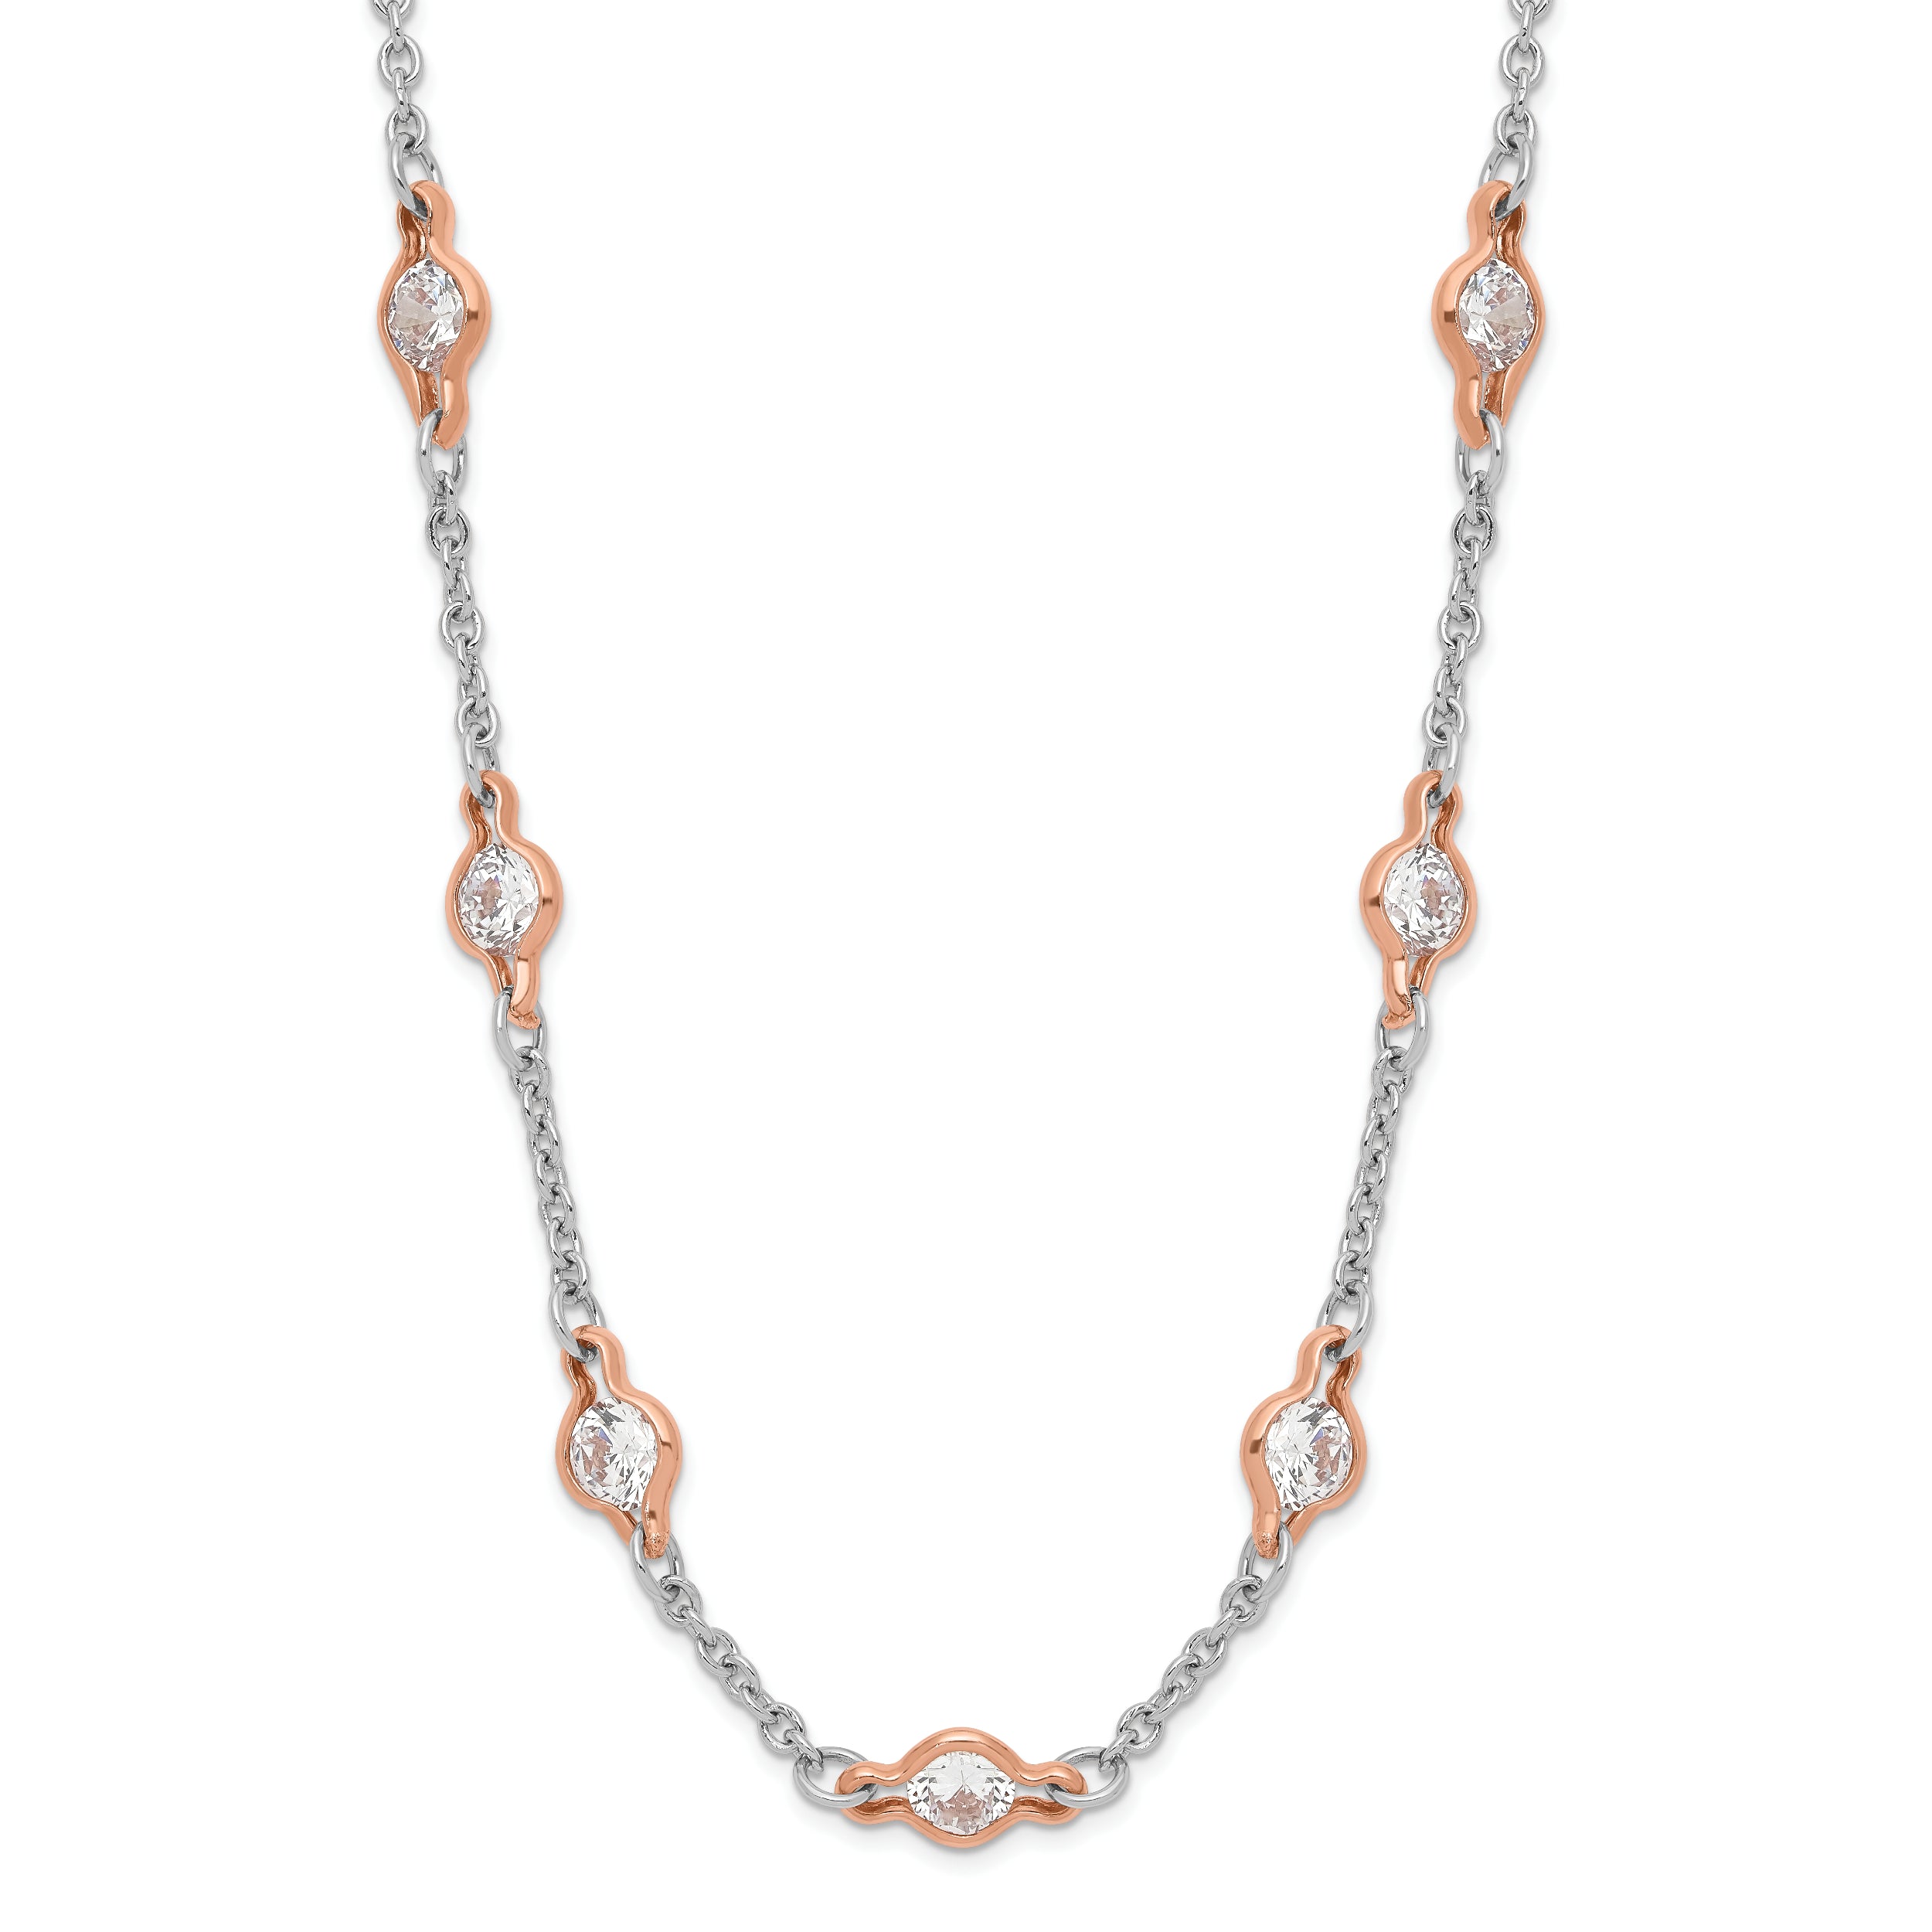 Cheryl M Sterling Silver Rhodium-plated and Rose Gold-plated Accent Brilliant-cut CZ 41 Station 36 Inch Necklace